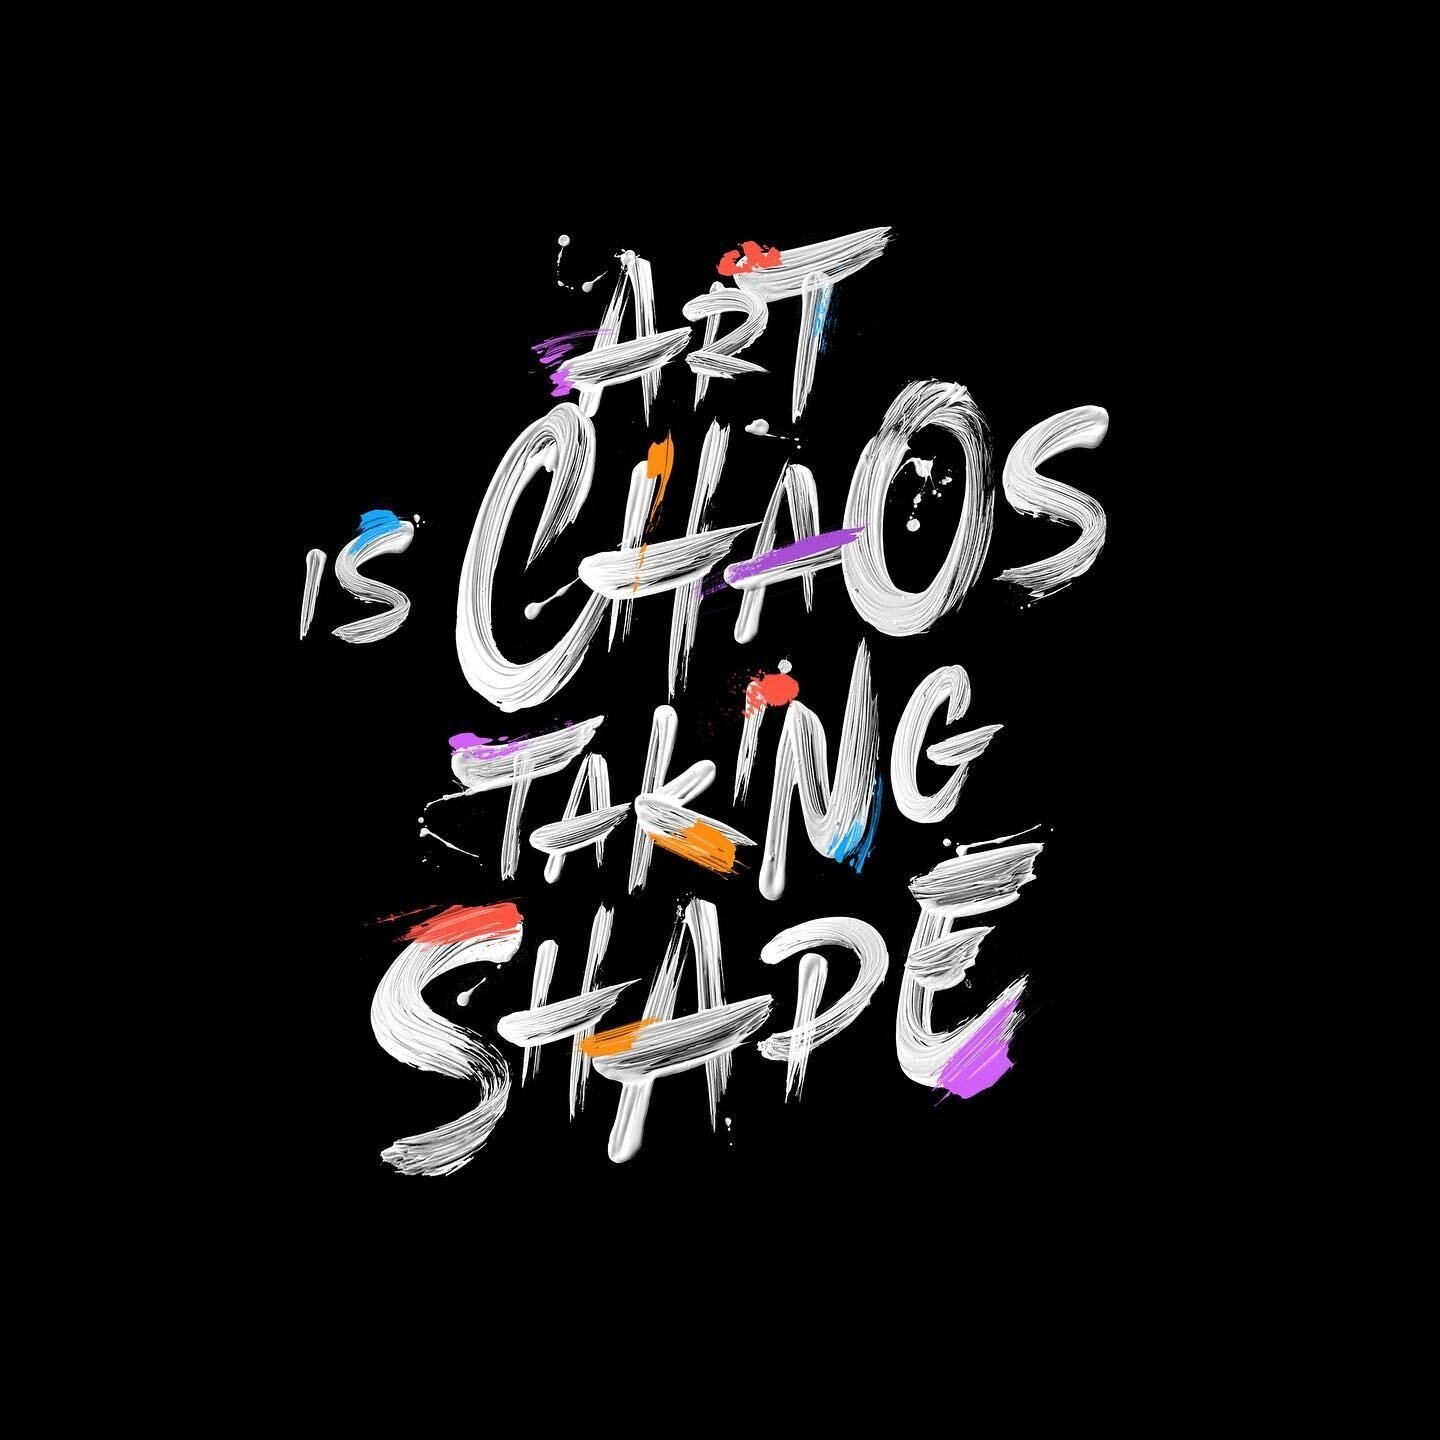 Brush lettering art by @emmelylaura 🙌 A beautiful mix of texture and a limited color palette! &quot;Art is chaos taking shape&quot; - Pablo Picasso⁠
⁠
⁠
#goodtype #typism #typespire #typeyeah #lettering #handlettering #letteringco #procreate #ipadle